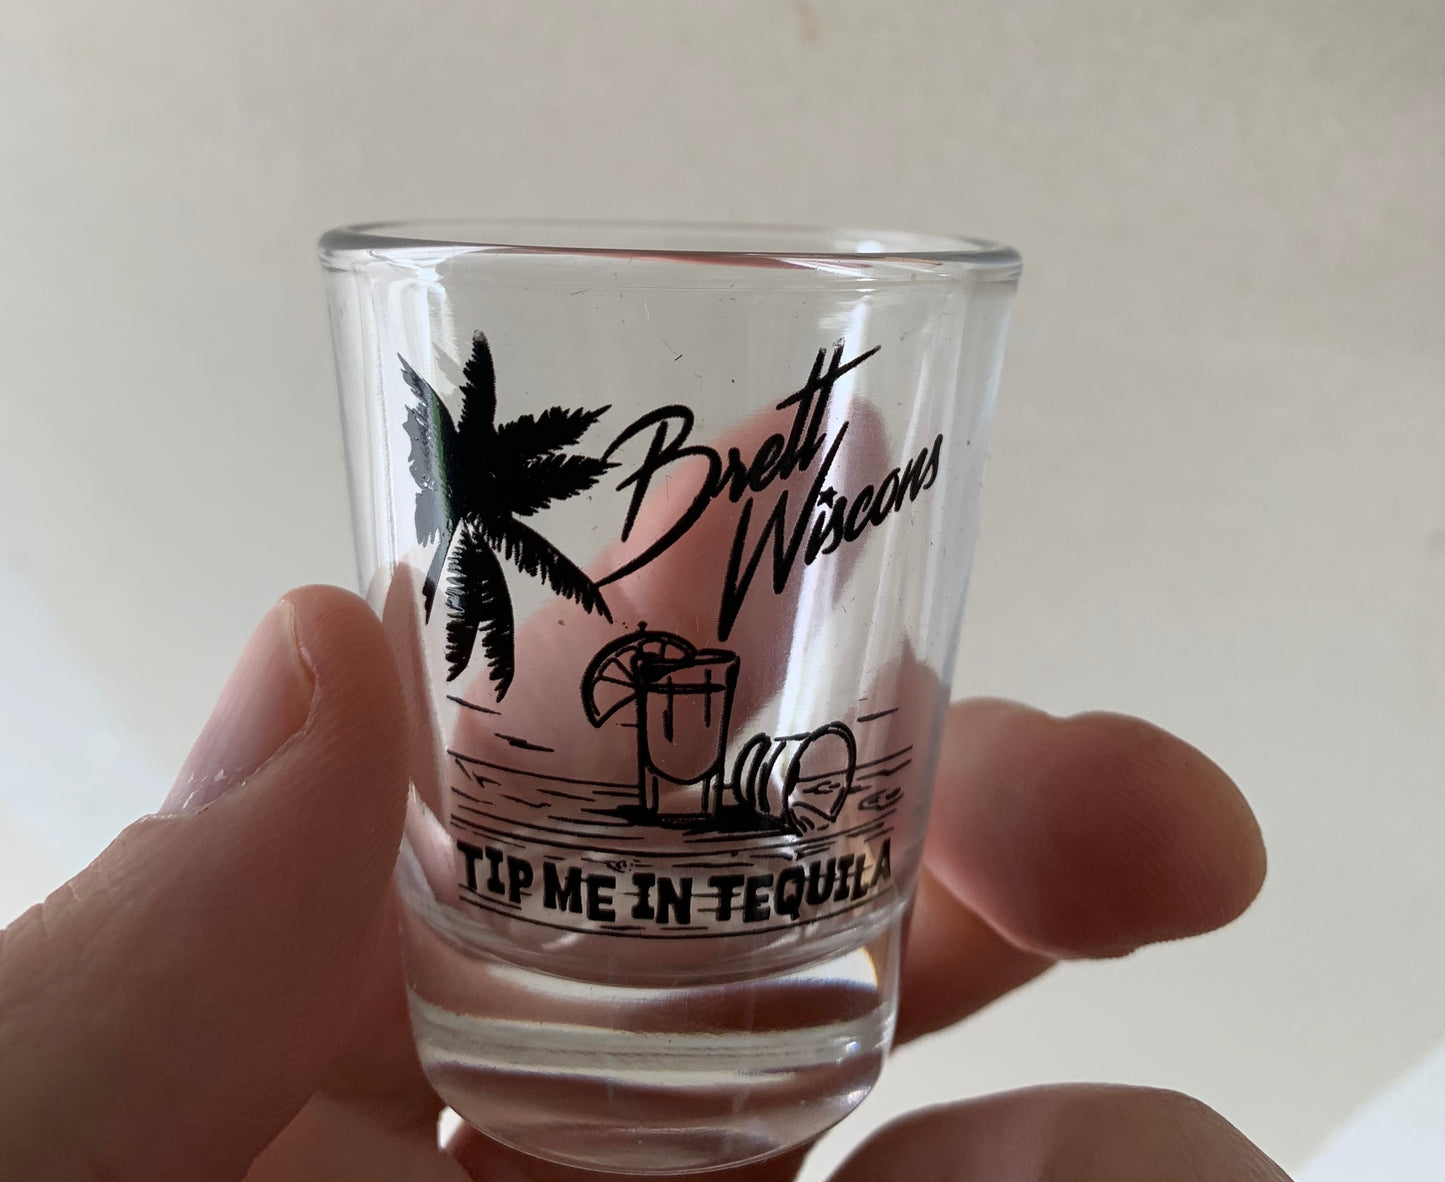 Tip Me in Tequila shot glass